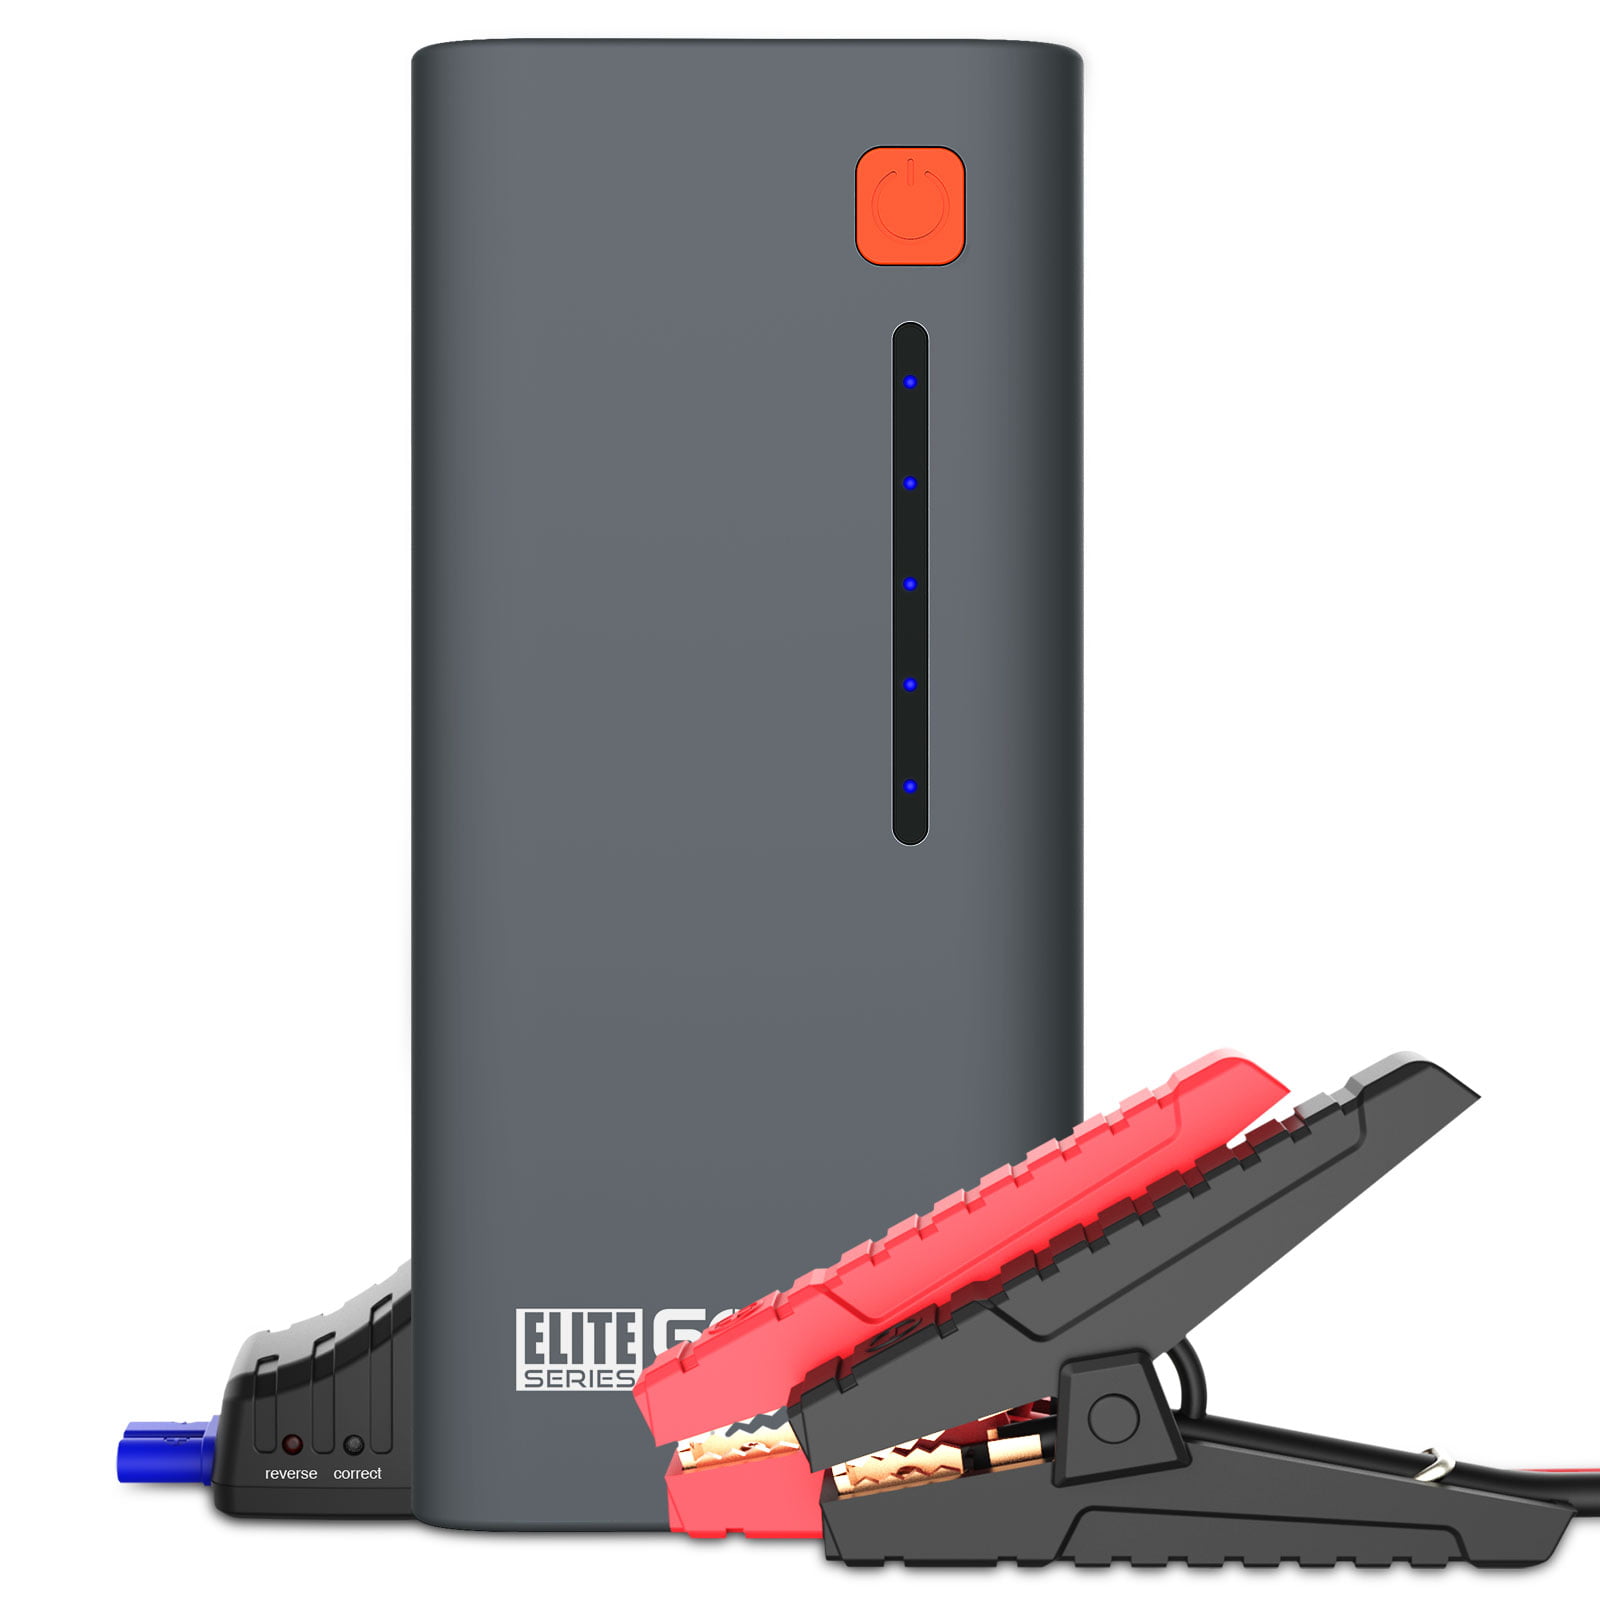 GOOLOO 800A Peak 18000mAh SuperSafe Car Jump Starter with USB Quick Charge 3.0 